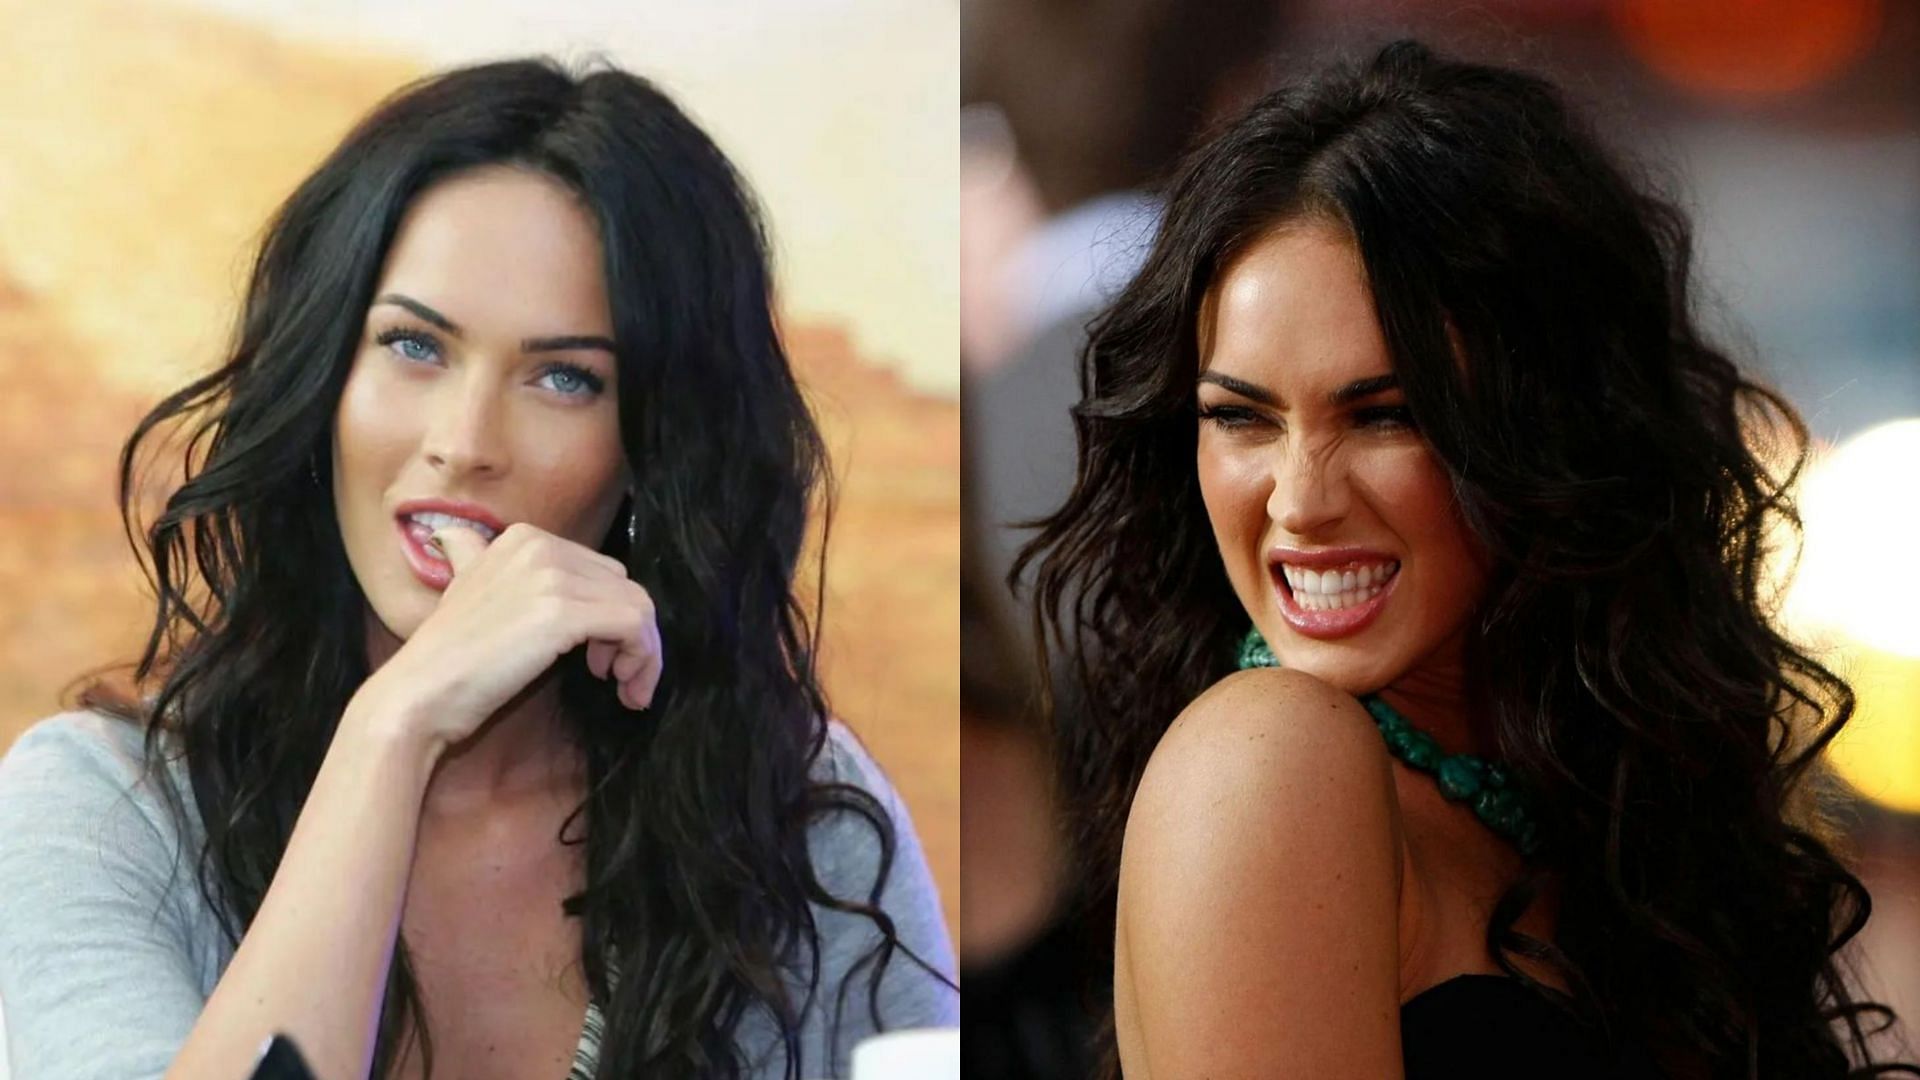 Hollywood star Megan Fox and The Rock once flirted on stage